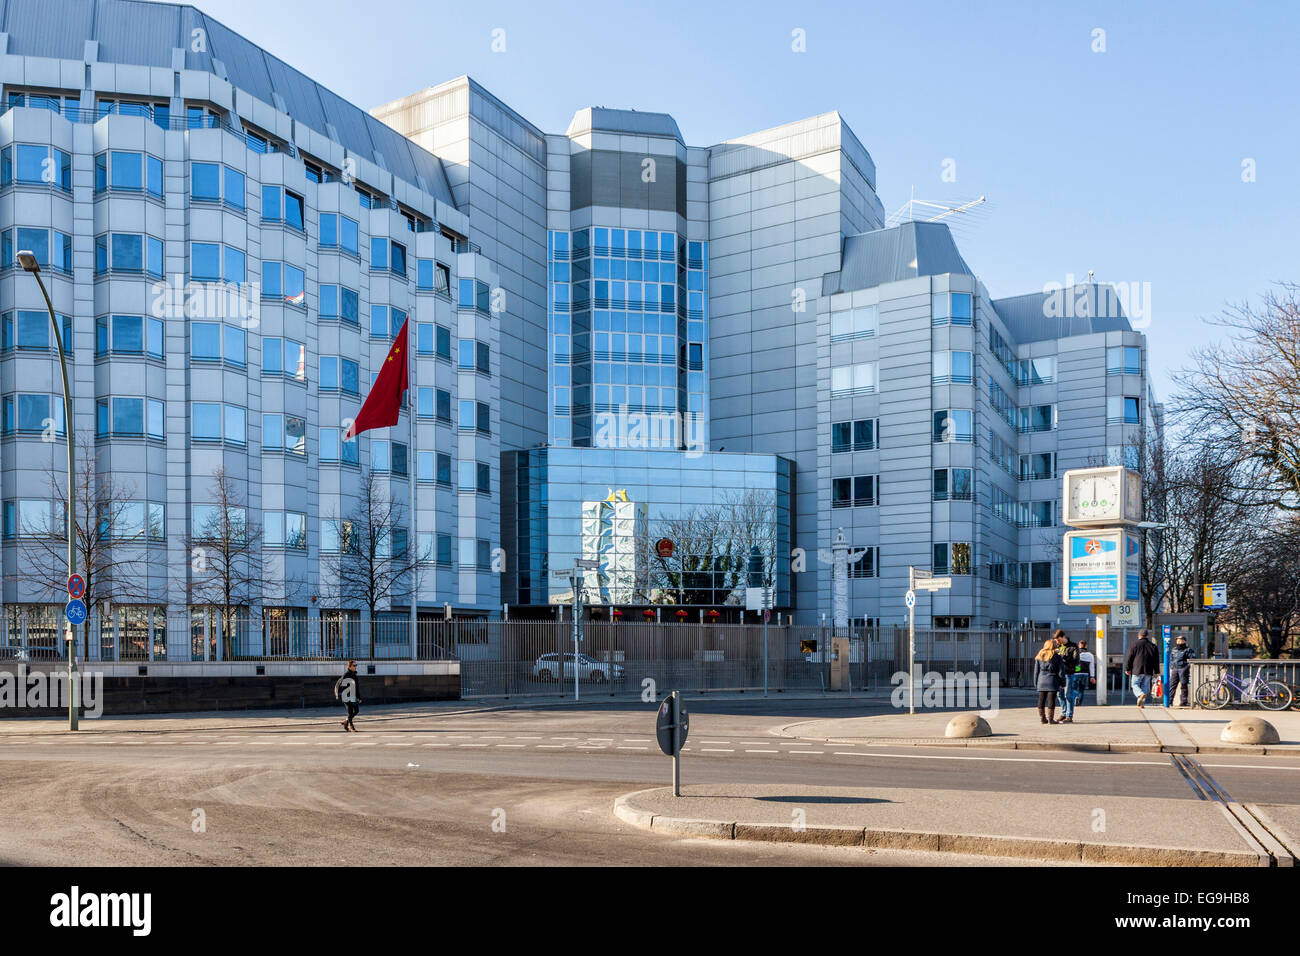 Fenced White concrete building, glass entrance and symbolic artworks of the Chinese Embassy - Mårkisches Ufer, Berlin Stock Photo